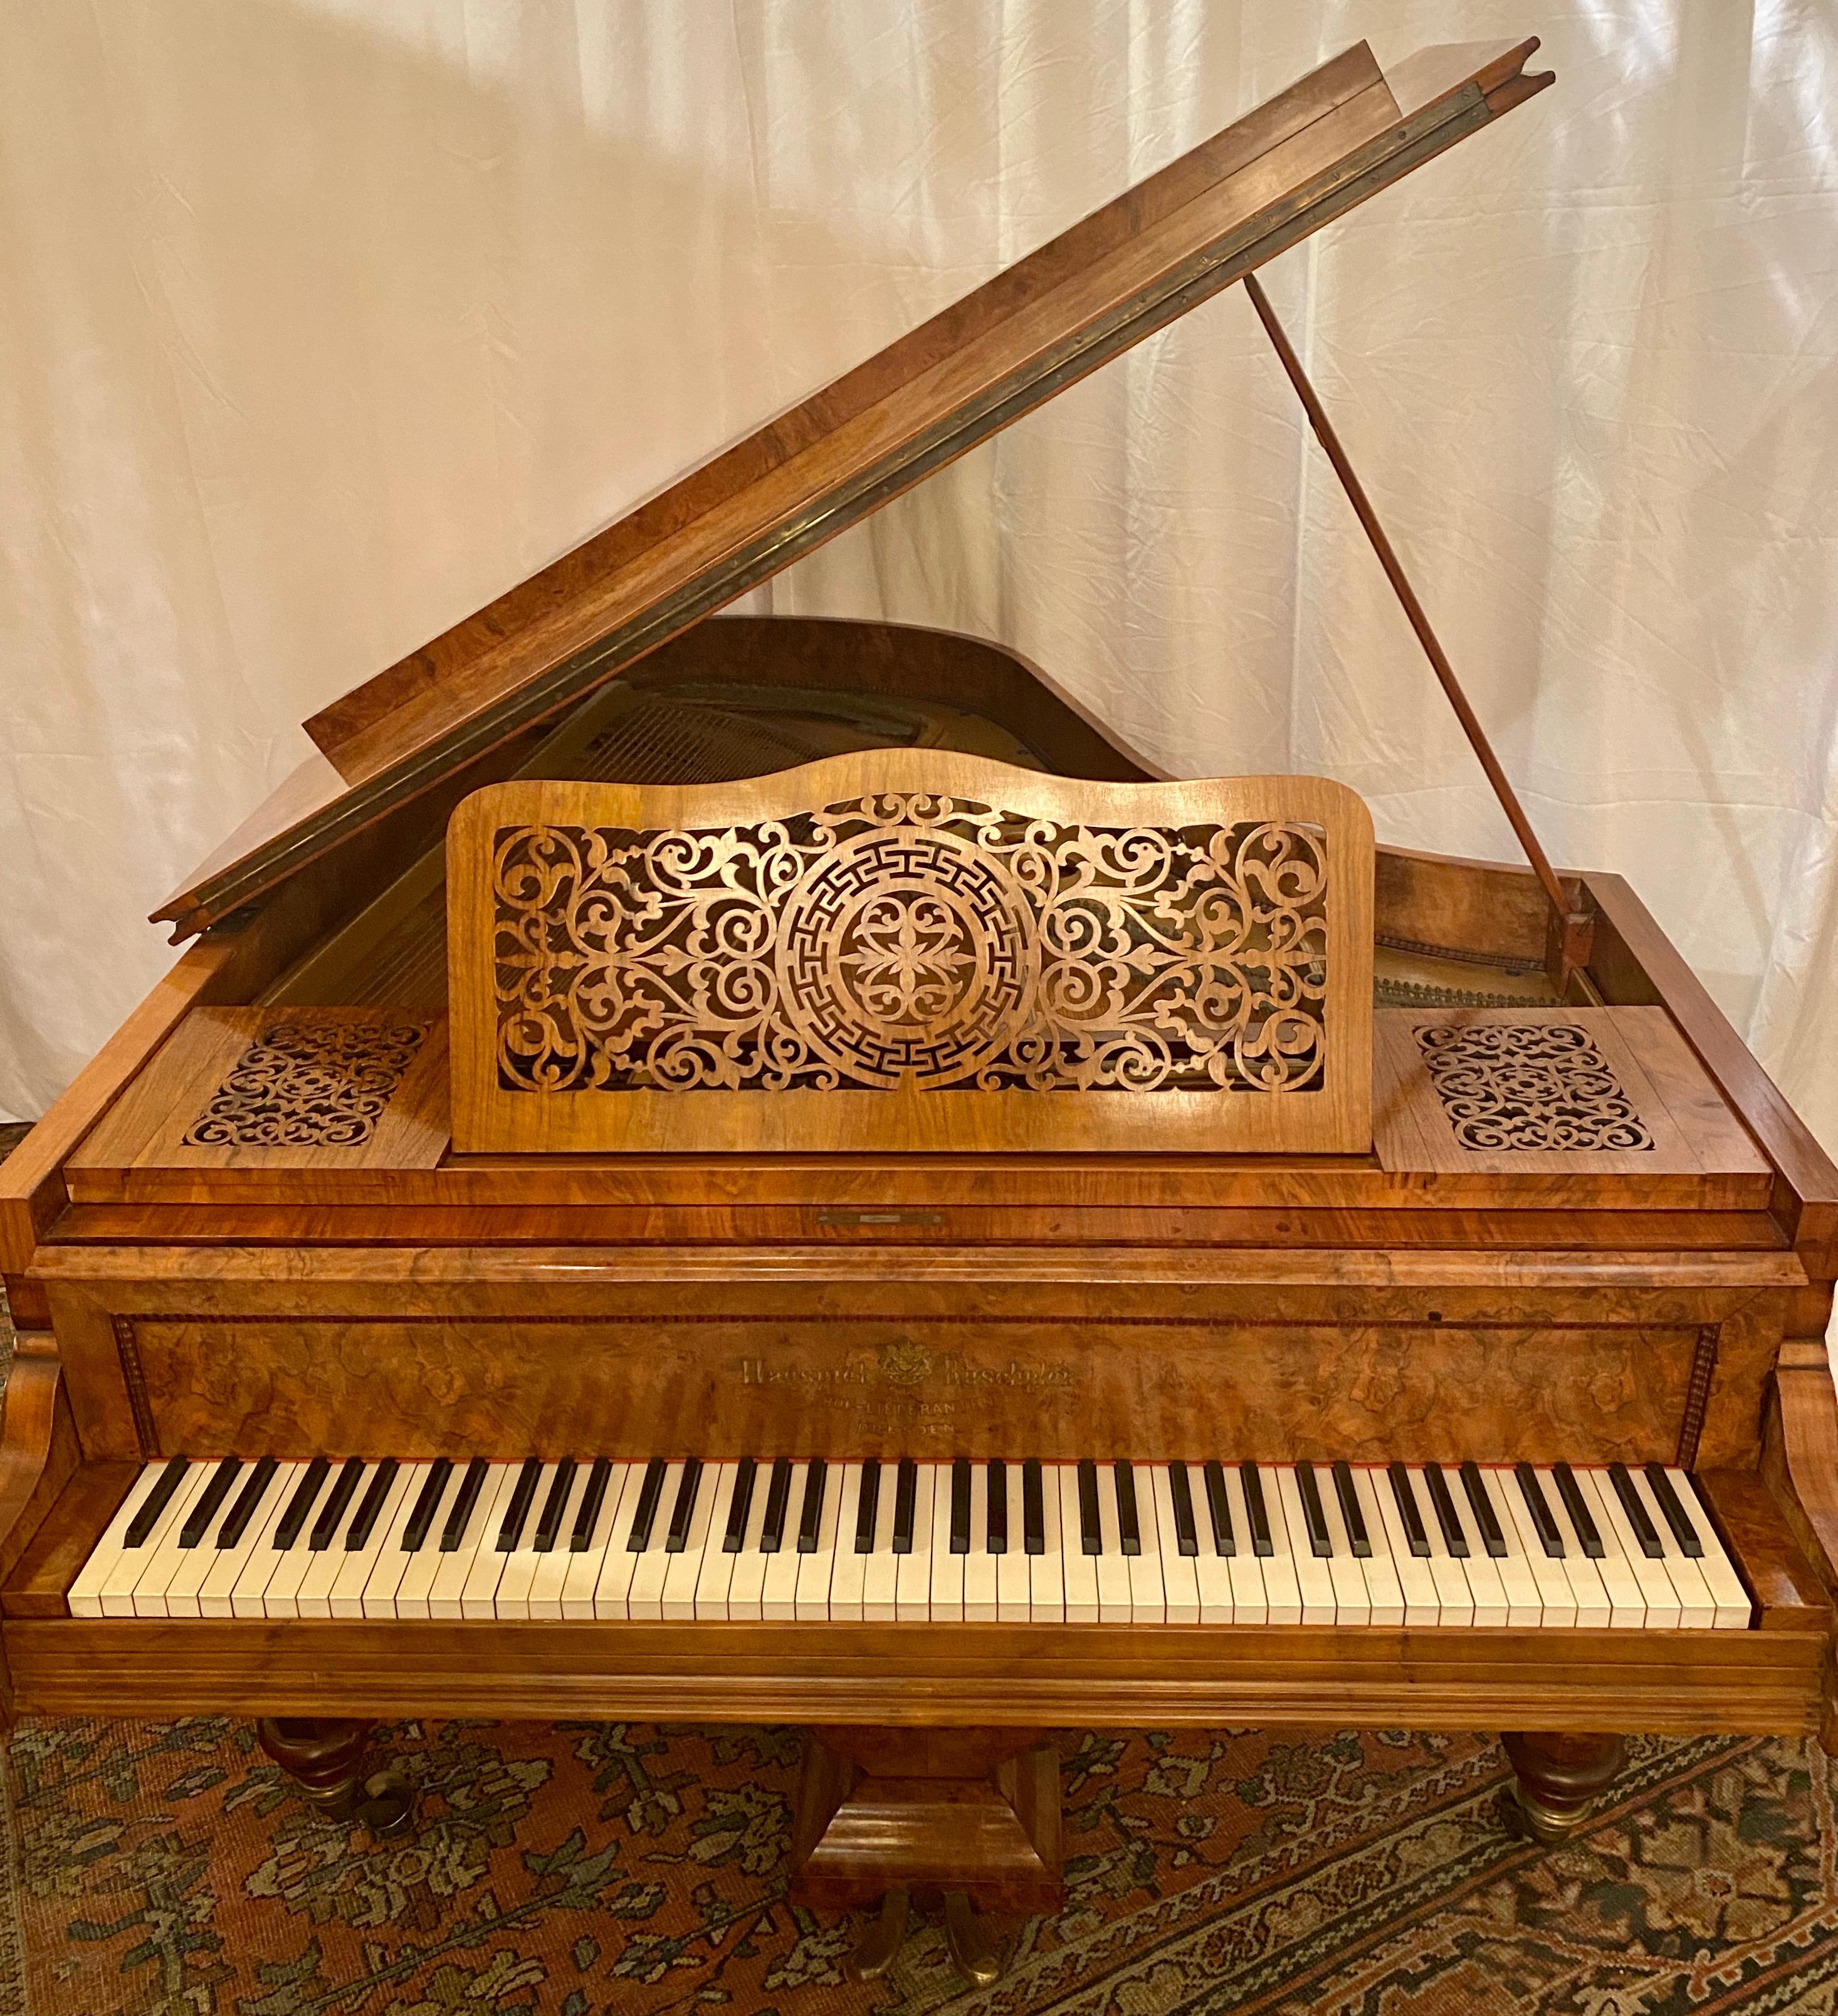 19th Century Antique Burled Walnut Parlor Grand Piano Made by Hagspiel & Ruschpler circa 1875